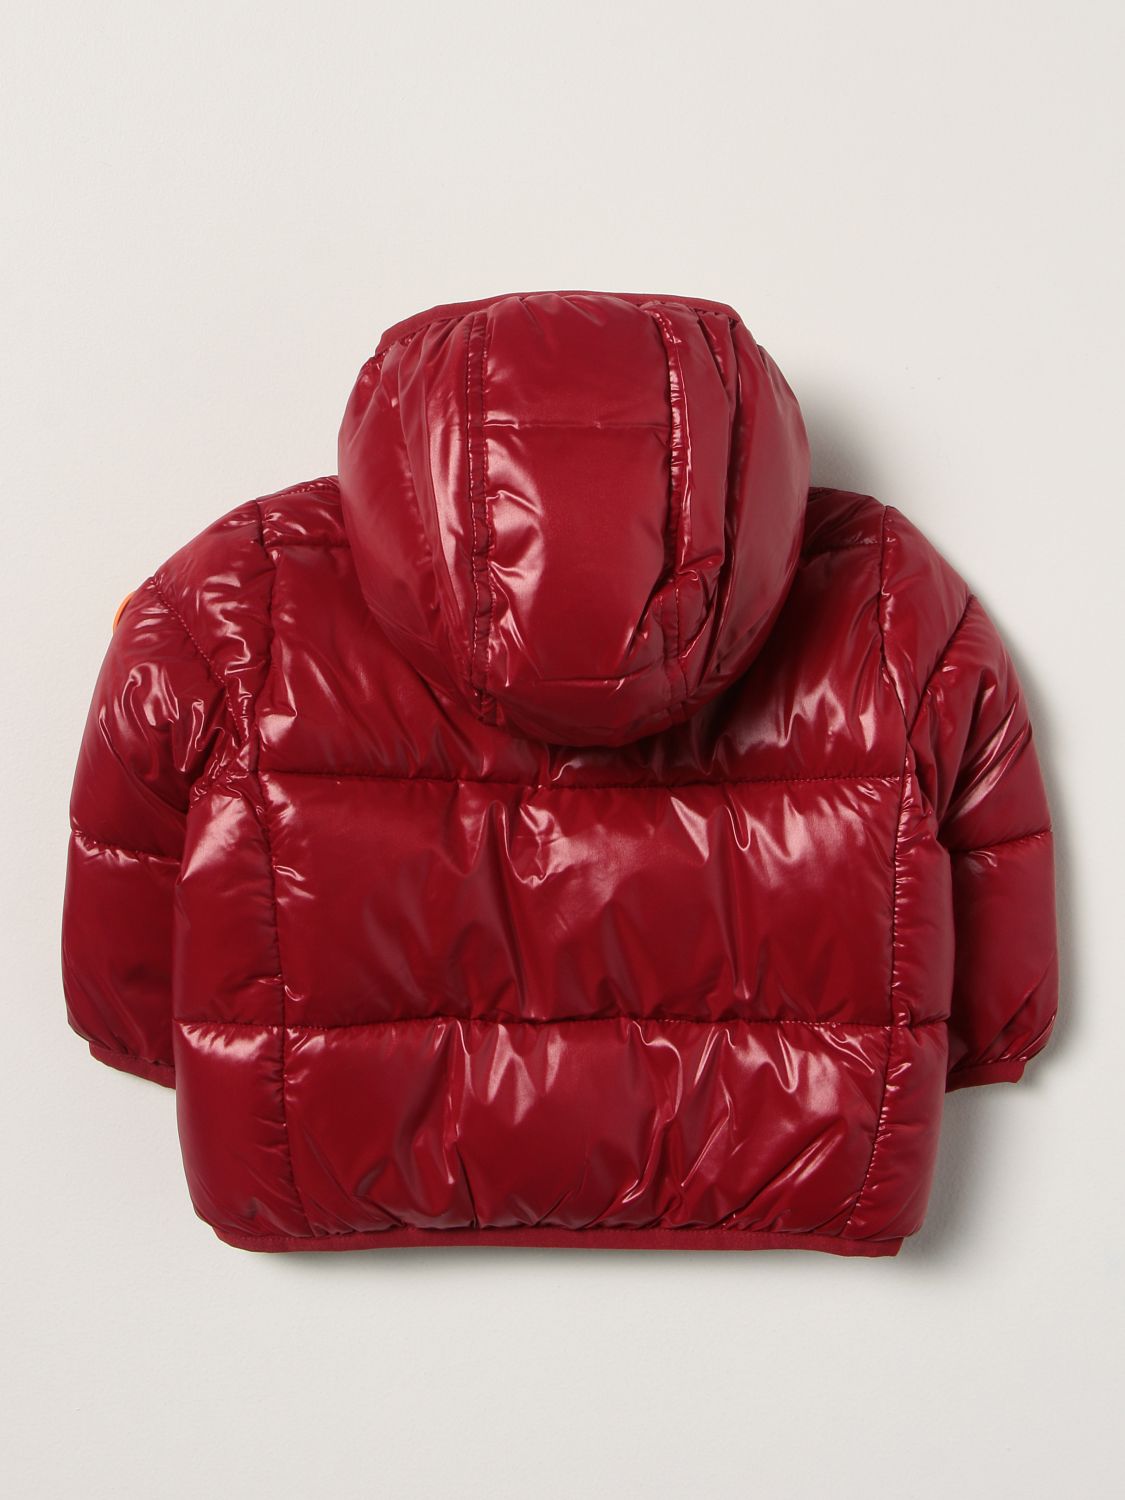 Jacket Save The Duck: Jacket kids Save The Duck burgundy 2